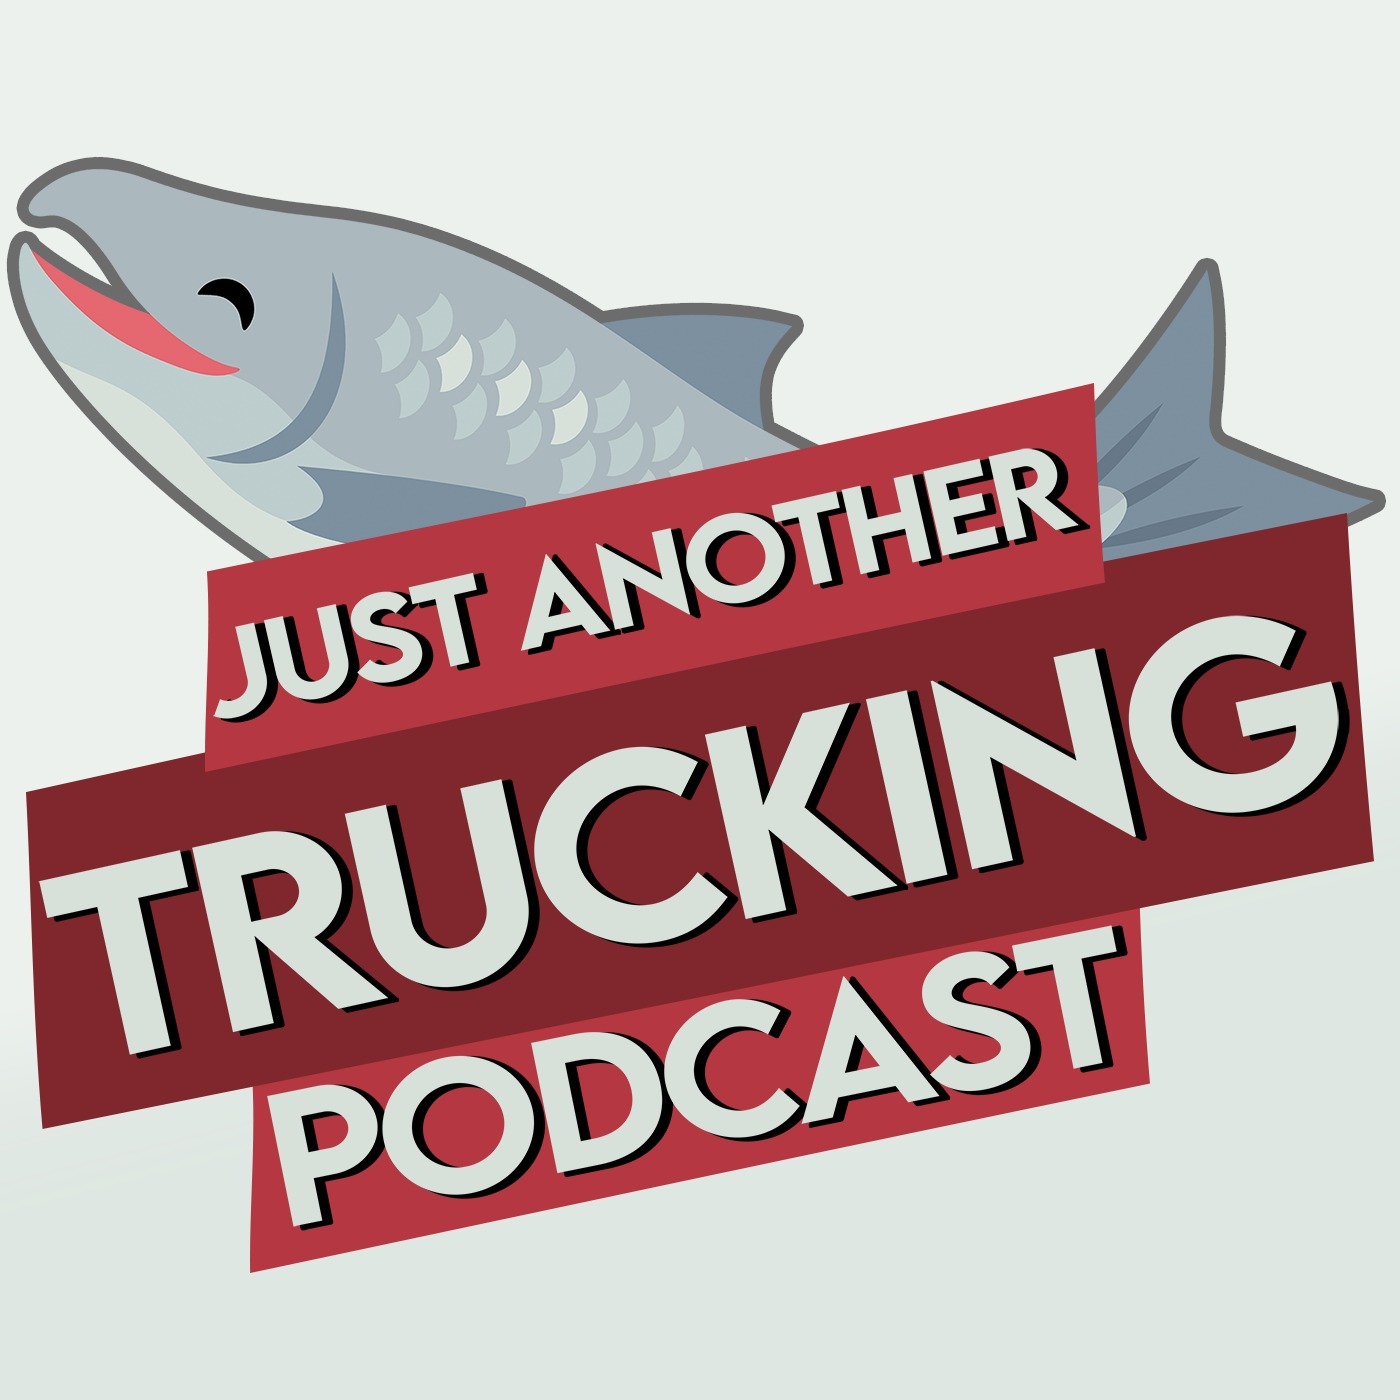 David's Toe fell off!! - Just Another Trucking Podcast